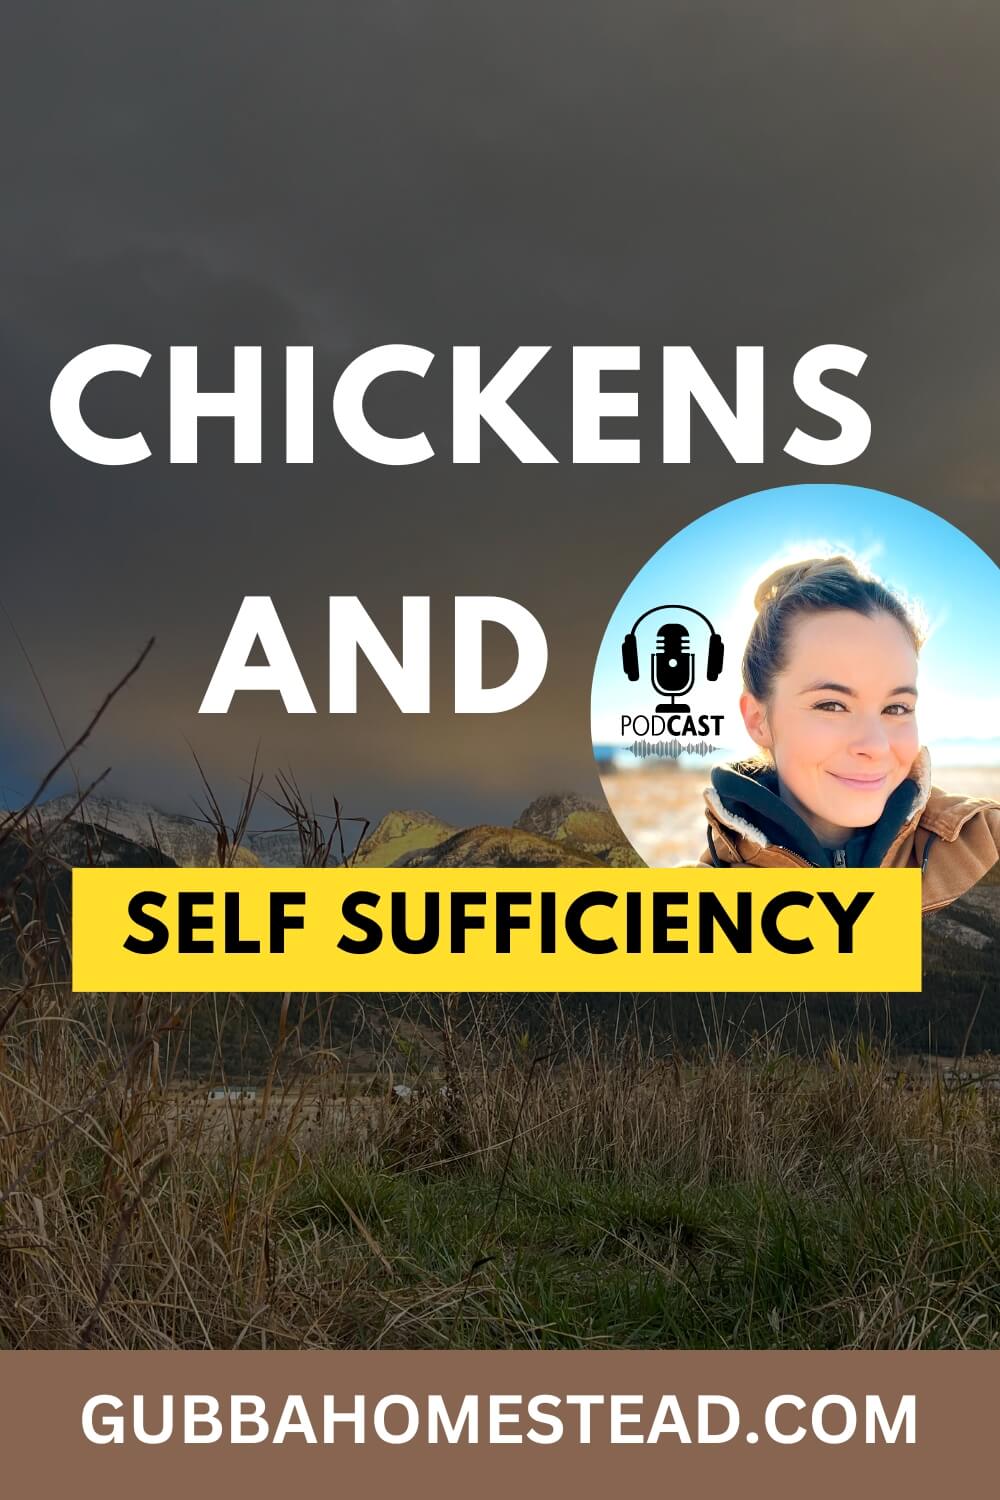 Chickens and Self Sufficiency